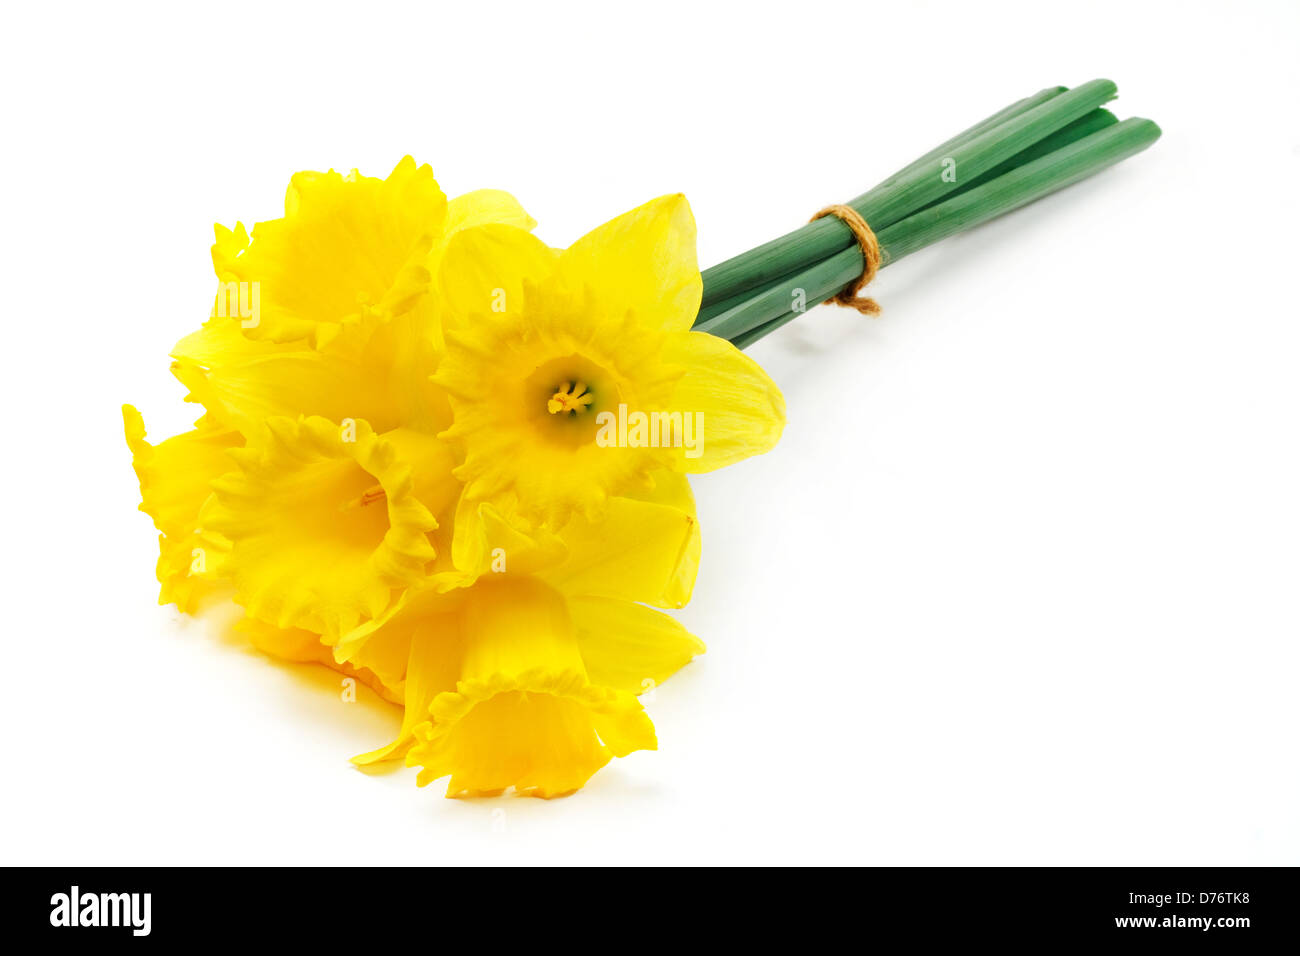 A bunch of daffodils a popular symbol of the spring season whose flowers bloom during springtime Stock Photo